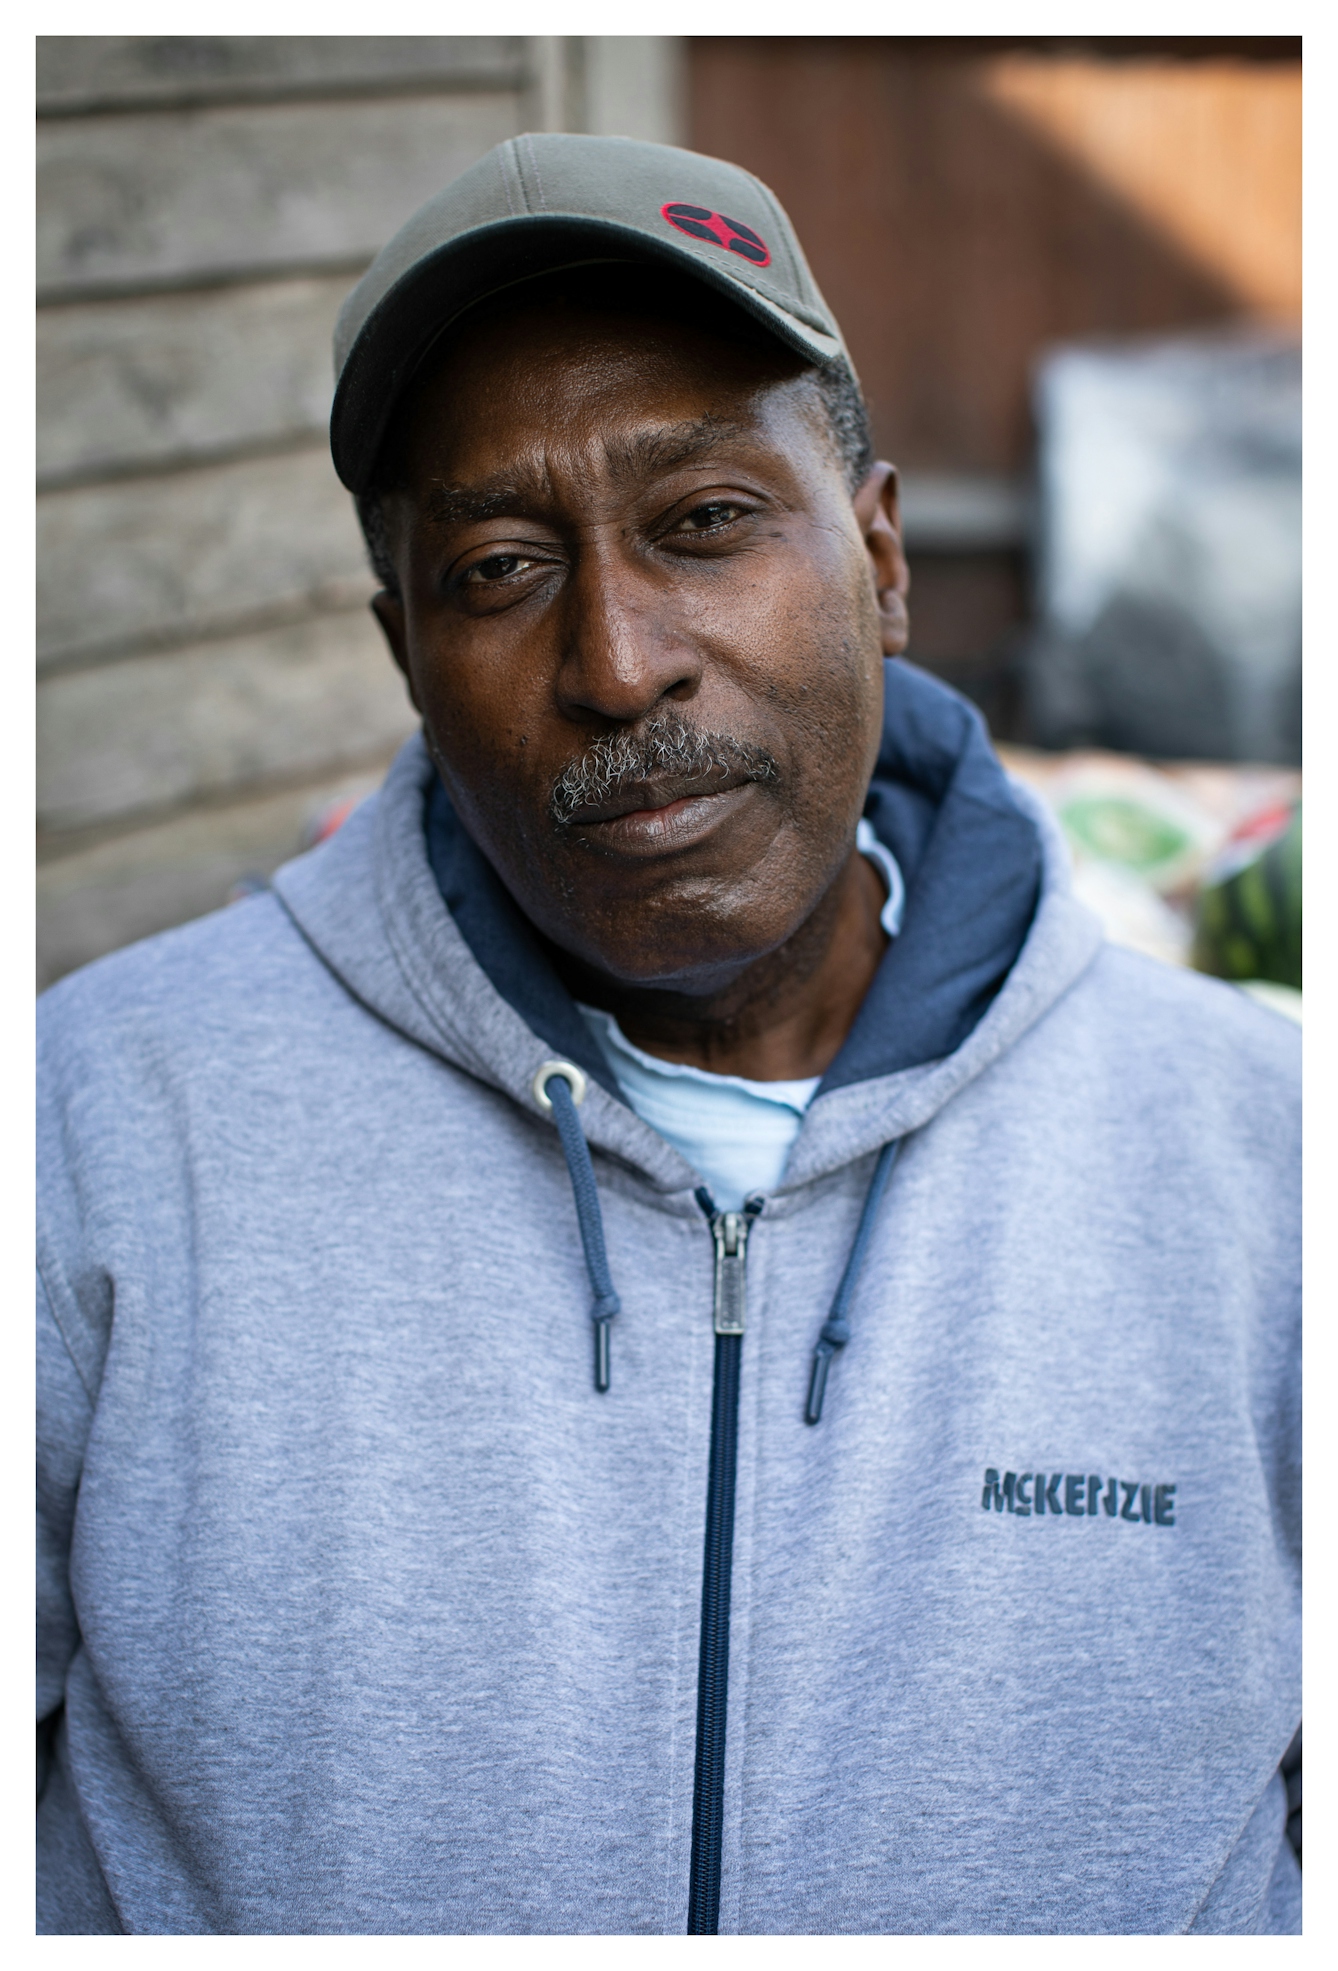 Photographic portrait of a Black man with a greying moustache, wearing a baseball cap and a light blue hooded top. He is looking to camera with his head slight tilted to the left. He has a kind, open expression on his face. Behind him are out-of-focus elements of a garden scene.